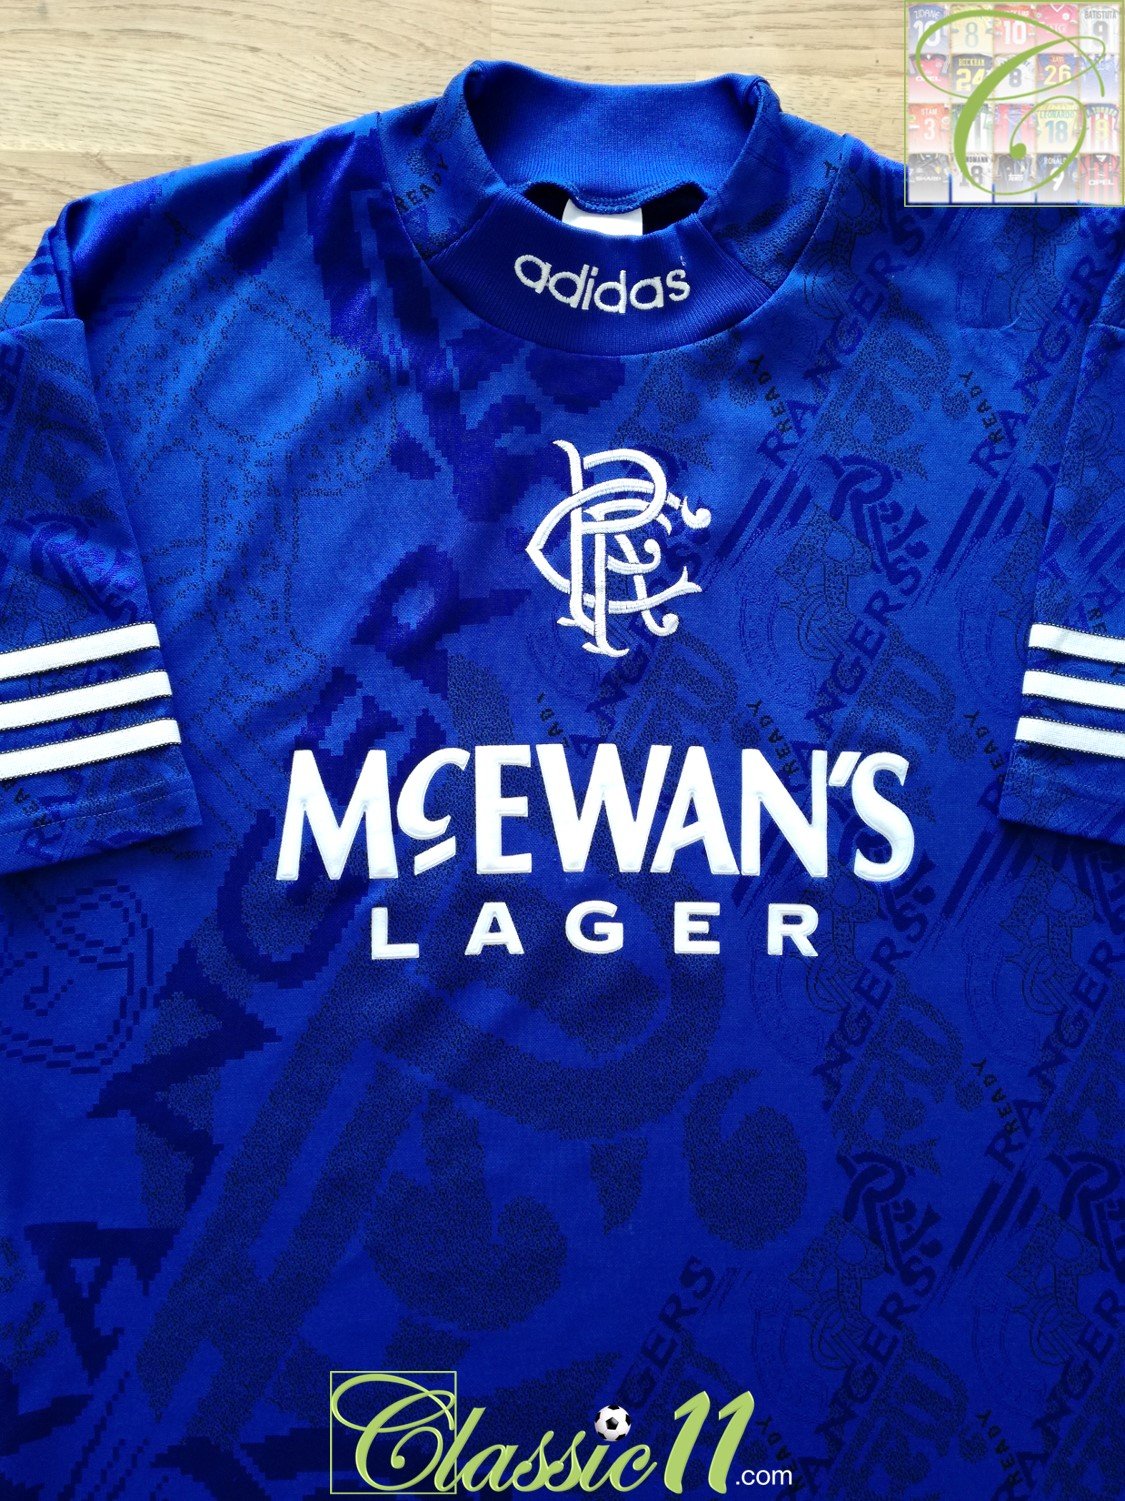 1994/95 Rangers Home Football Shirt / Old Vintage Adidas Soccer Jersey |